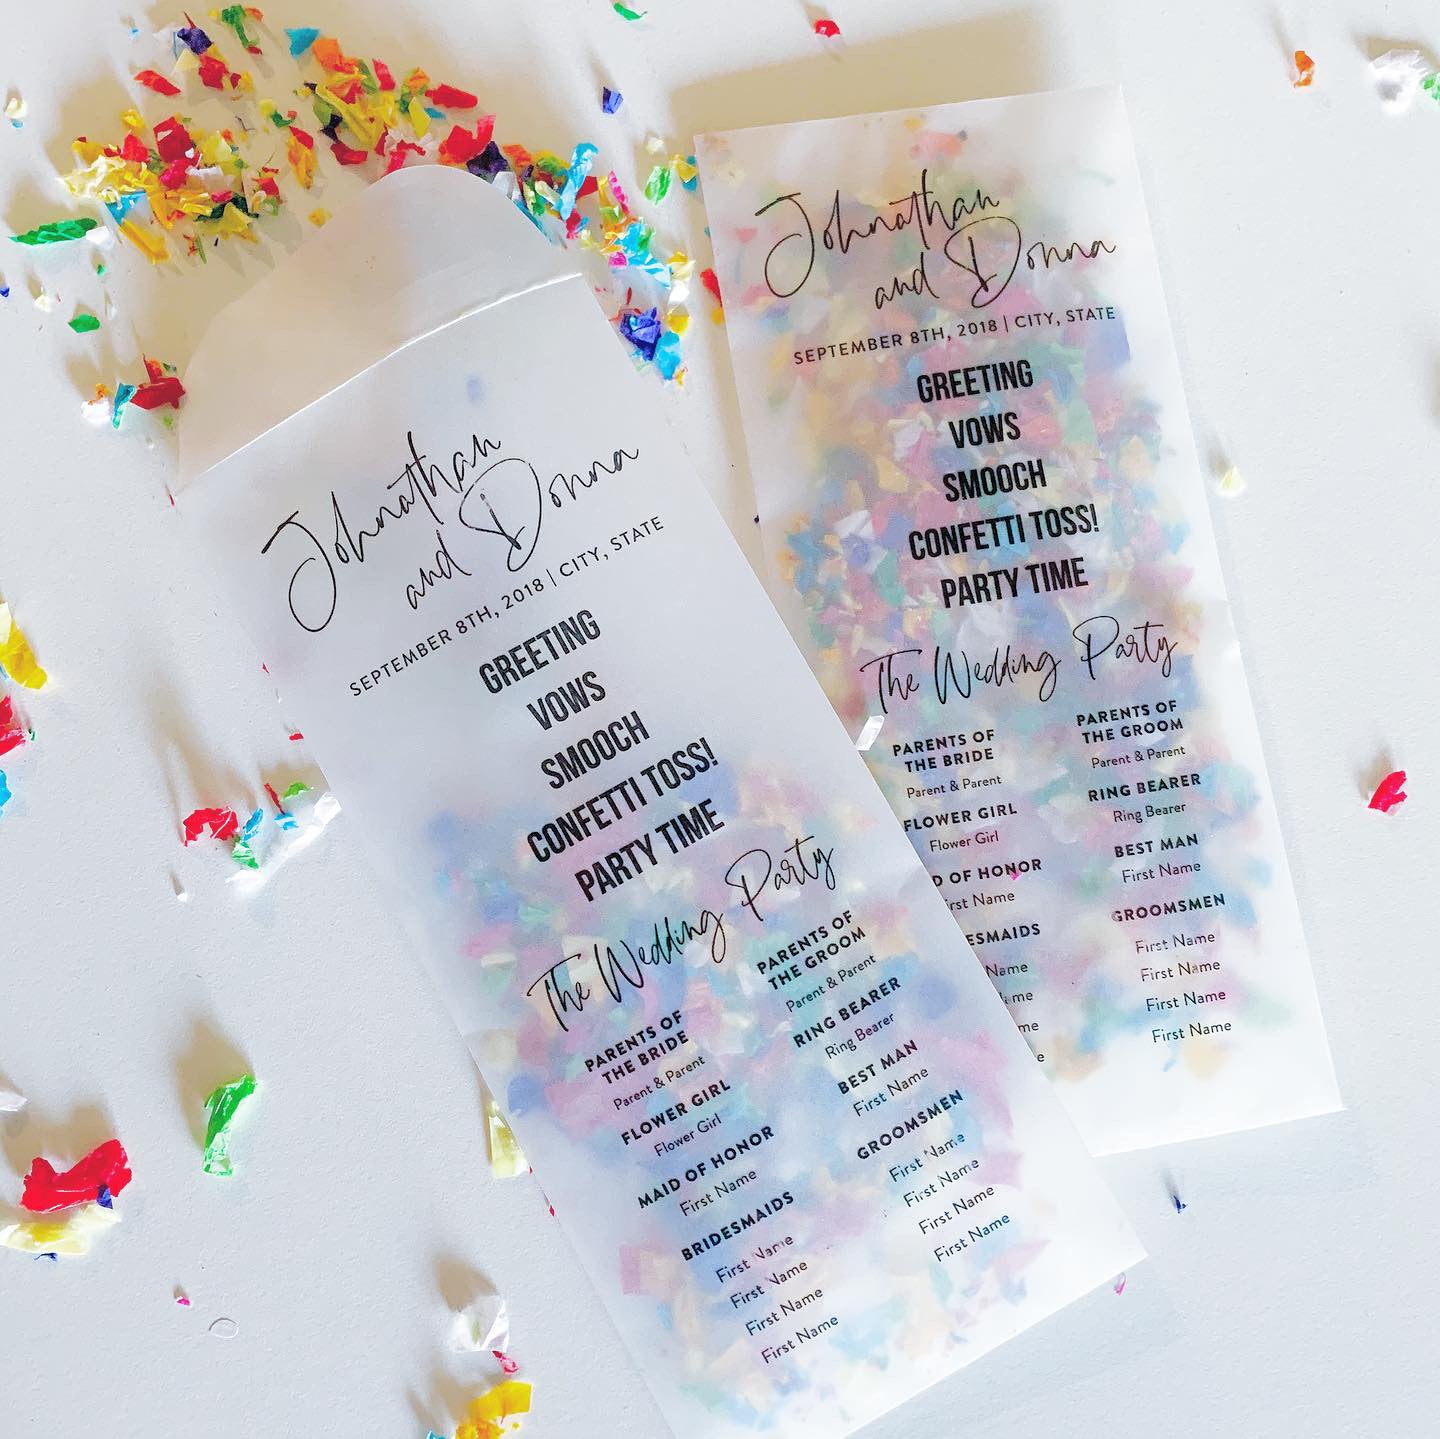 A vellum paper bag with dried flowers for confetti